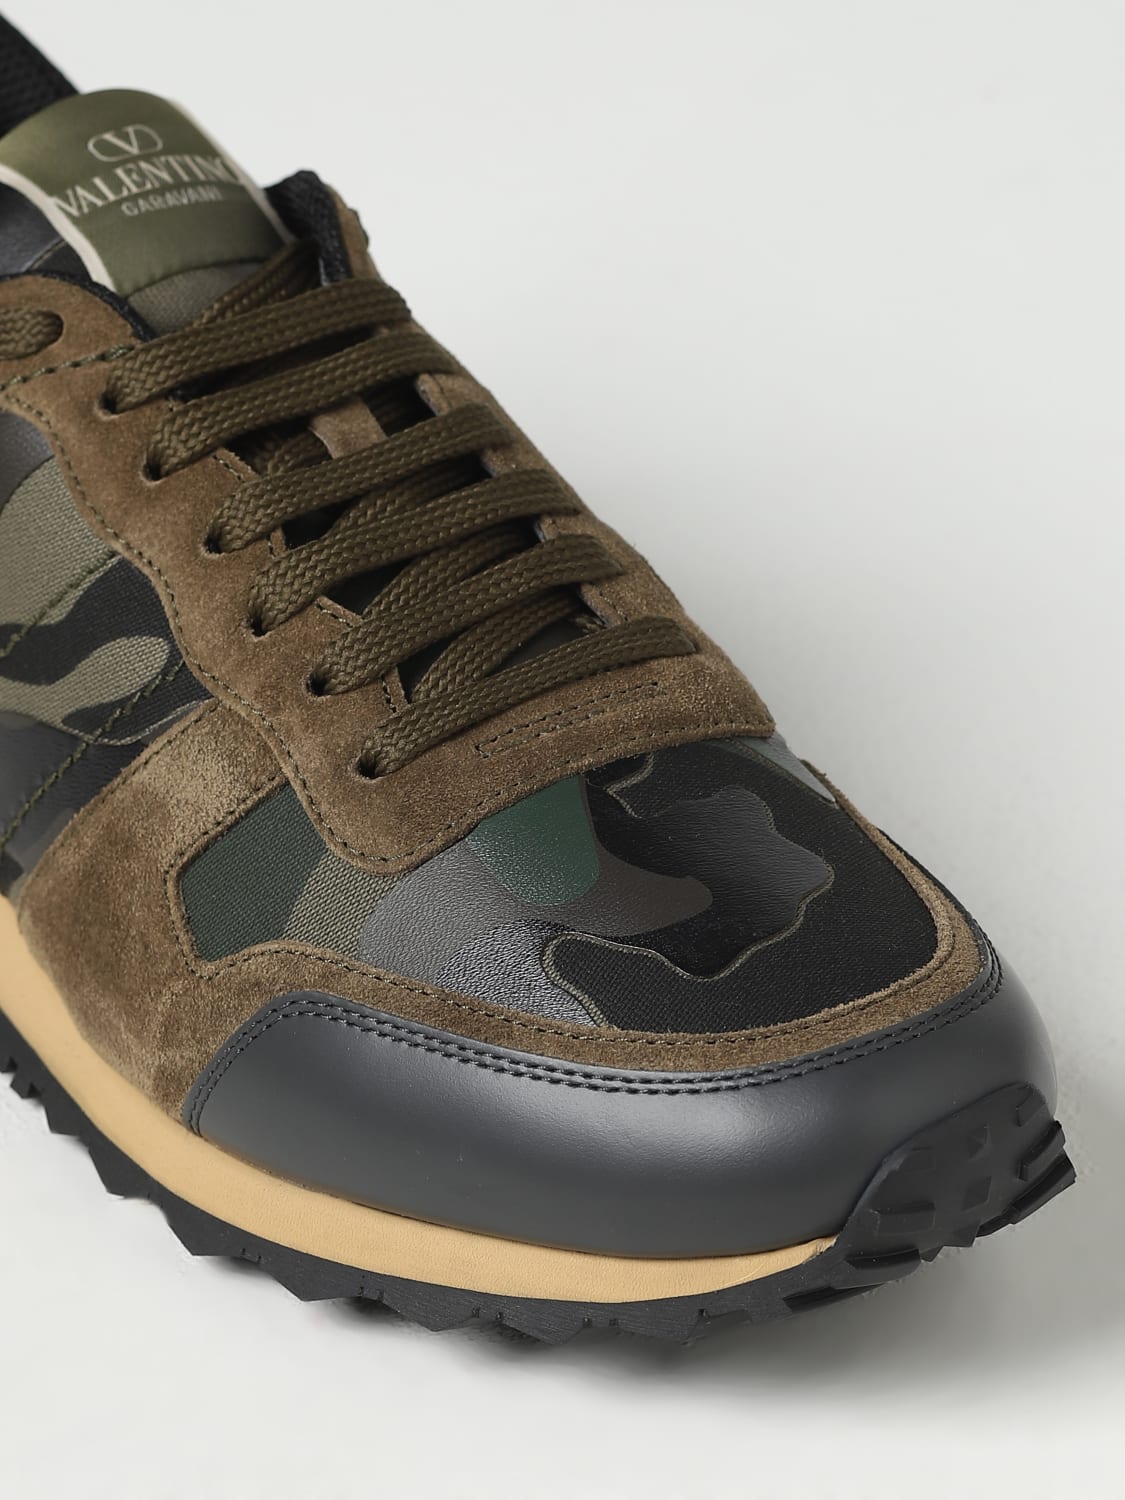 Kan ignoreres Rullesten Fjern VALENTINO GARAVANI: Rockrunner sneakers in nappa leather and camouflage  fabric - Green | Valentino Garavani sneakers 3Y2S0723TCC online at  GIGLIO.COM